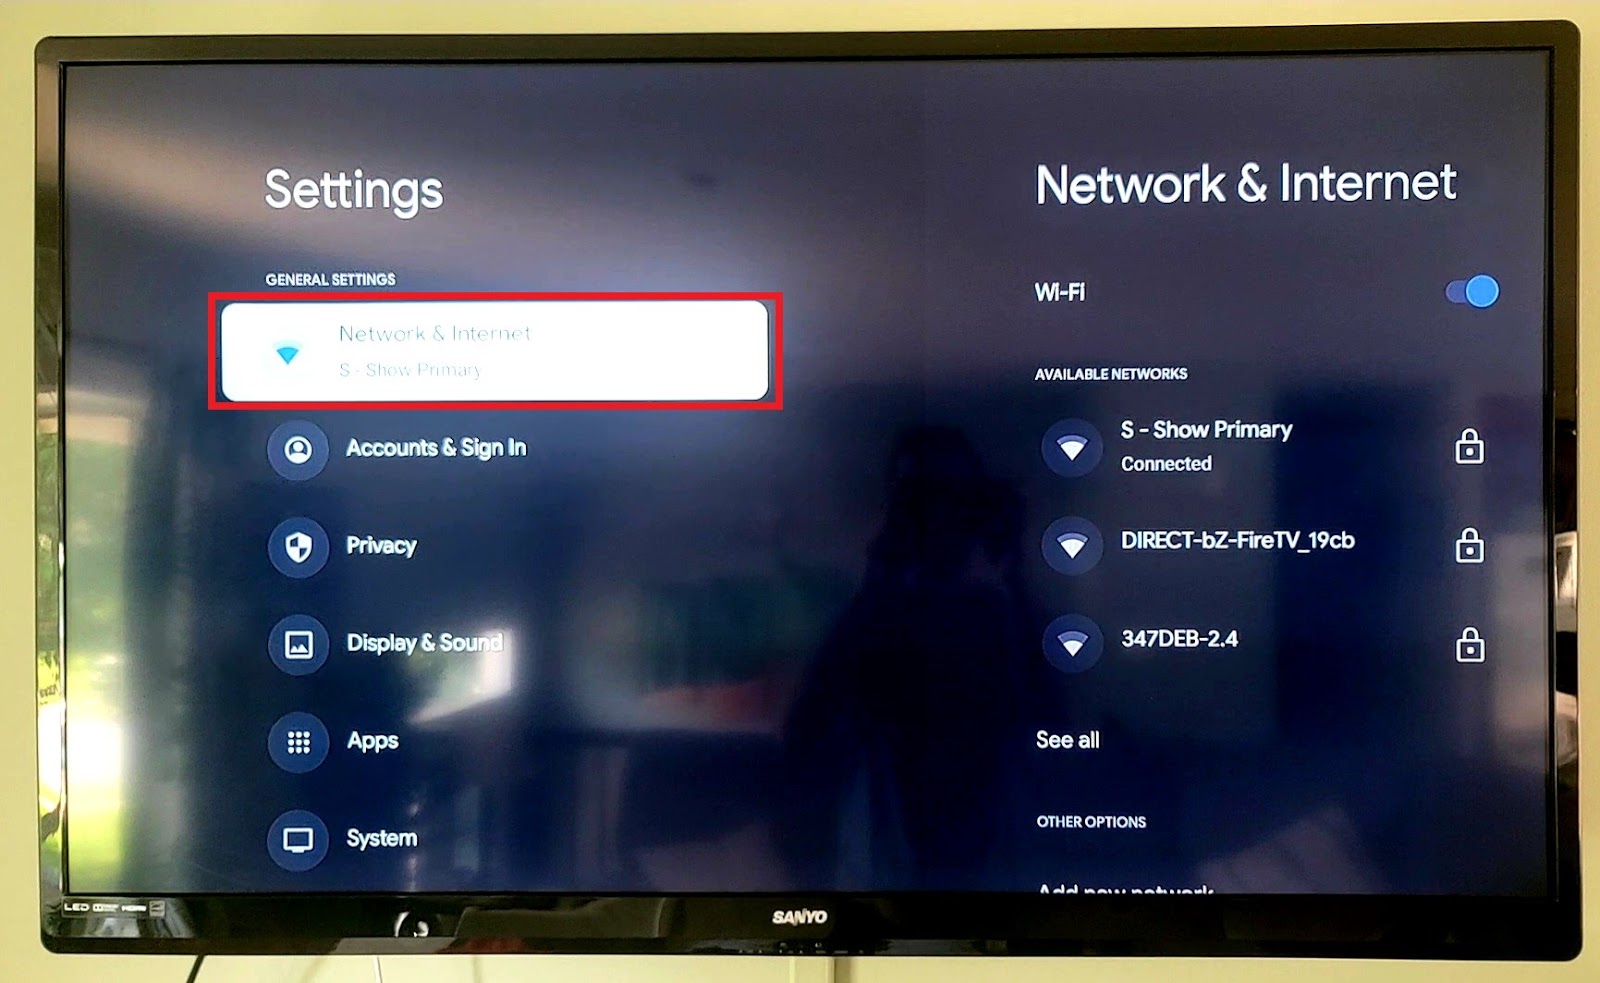 Selecting "Network and Internet" will bring you to the Wi-Fi settings area.